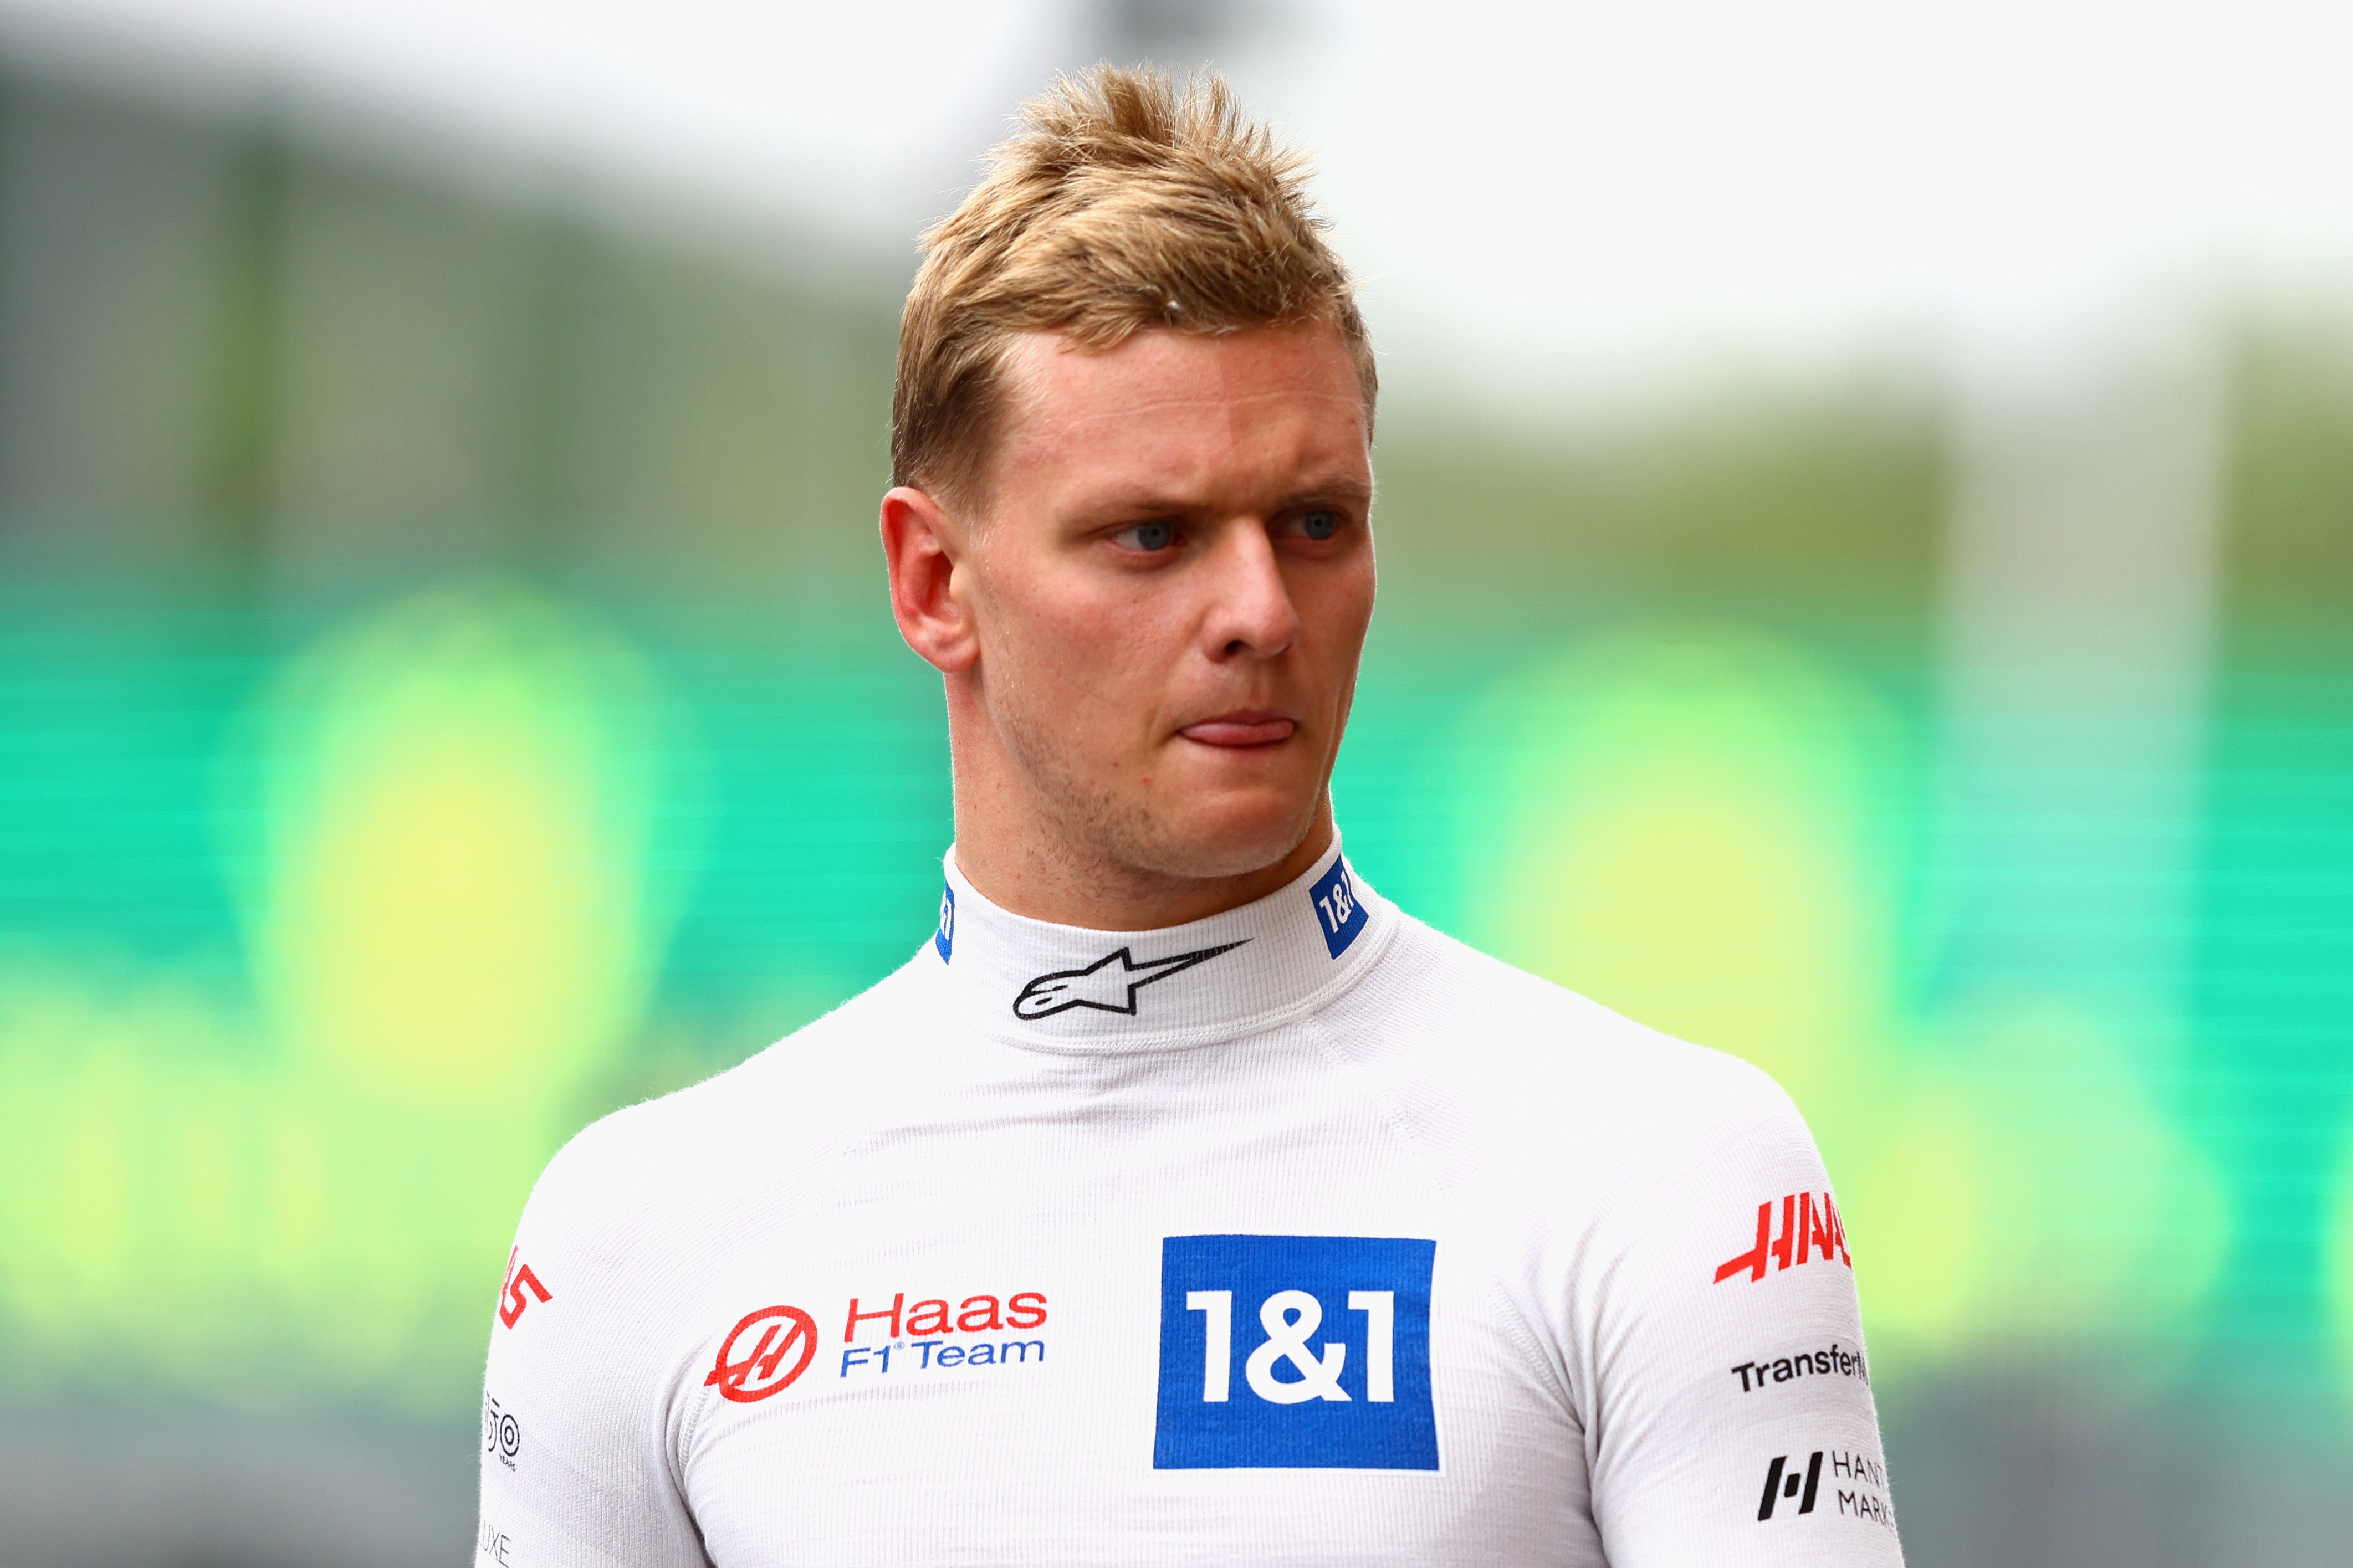 Mick Schumacher is facing a fight to save his Formula 1 career after being dropped by Haas